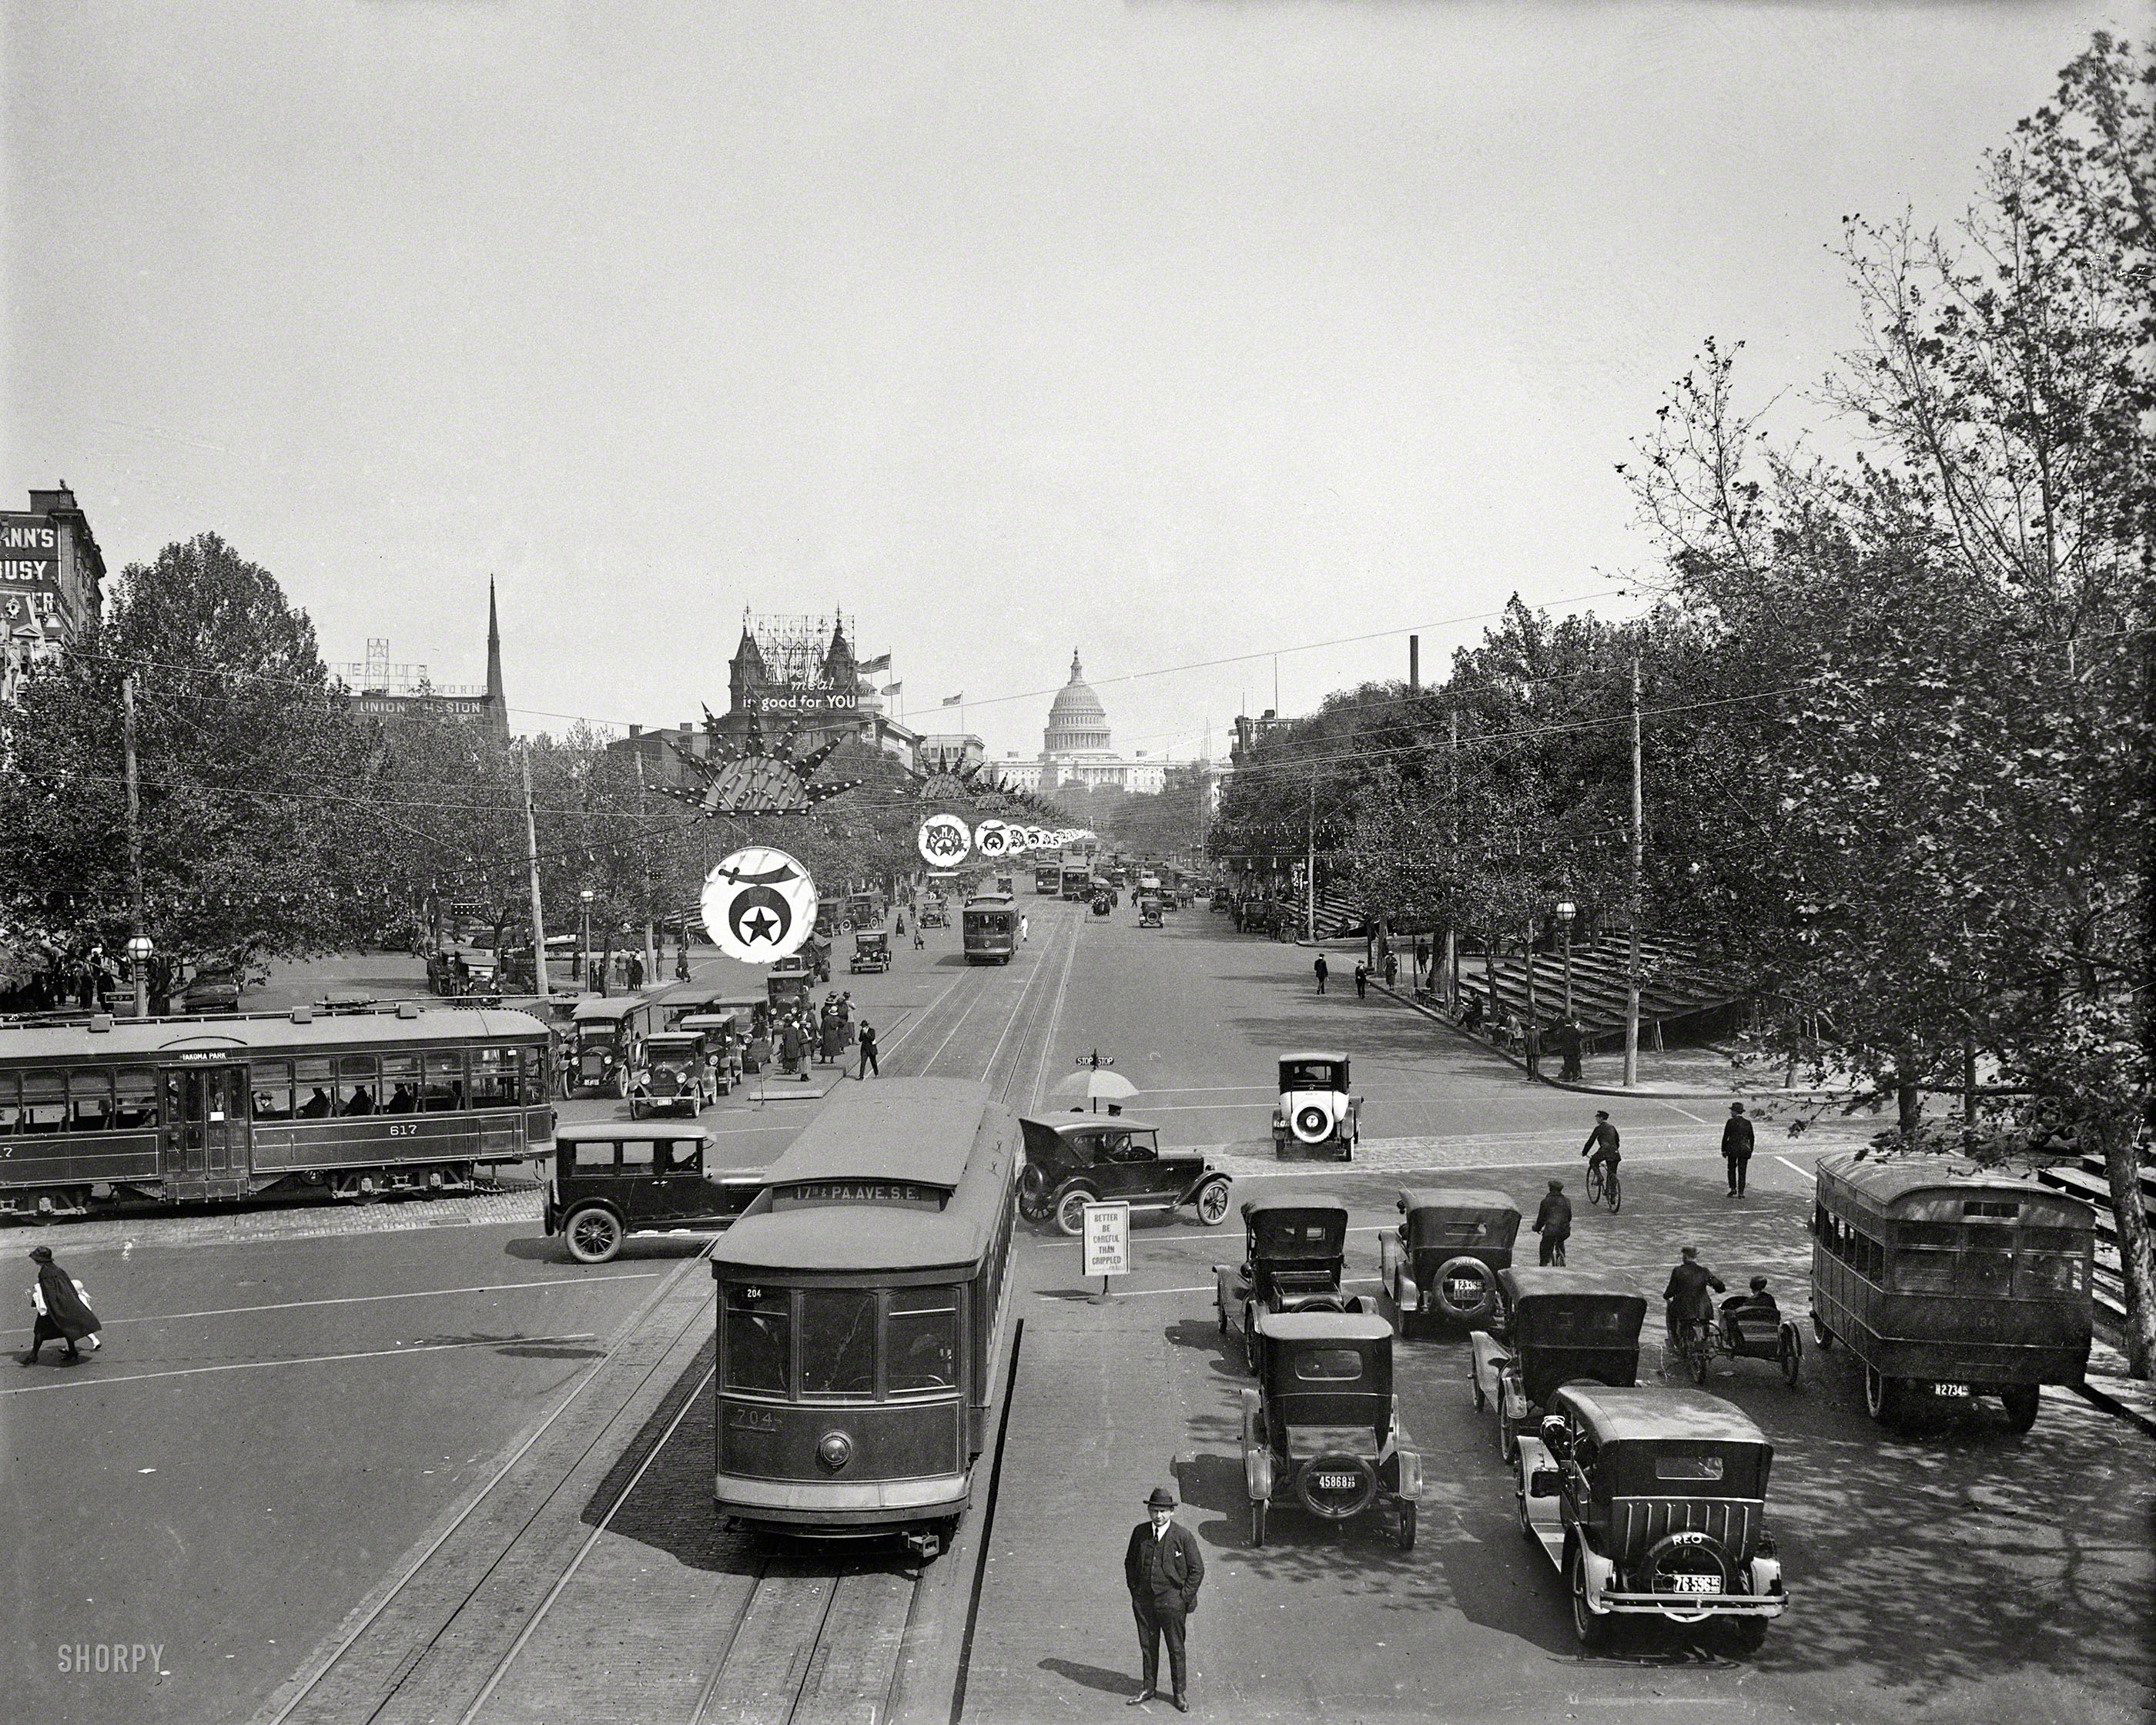 Reviewing stands set up for the Shriners Convention of June 1923, which hosted a quarter-million delegates from lodges and temples across the United States in Washington for a week of parades along Pennsylvania Avenue, strung with thousands of lights and rechristened the "Road to Mecca" at a time when interest in fraternal organizations was at its peak. Harris & Ewing photo. View full size.